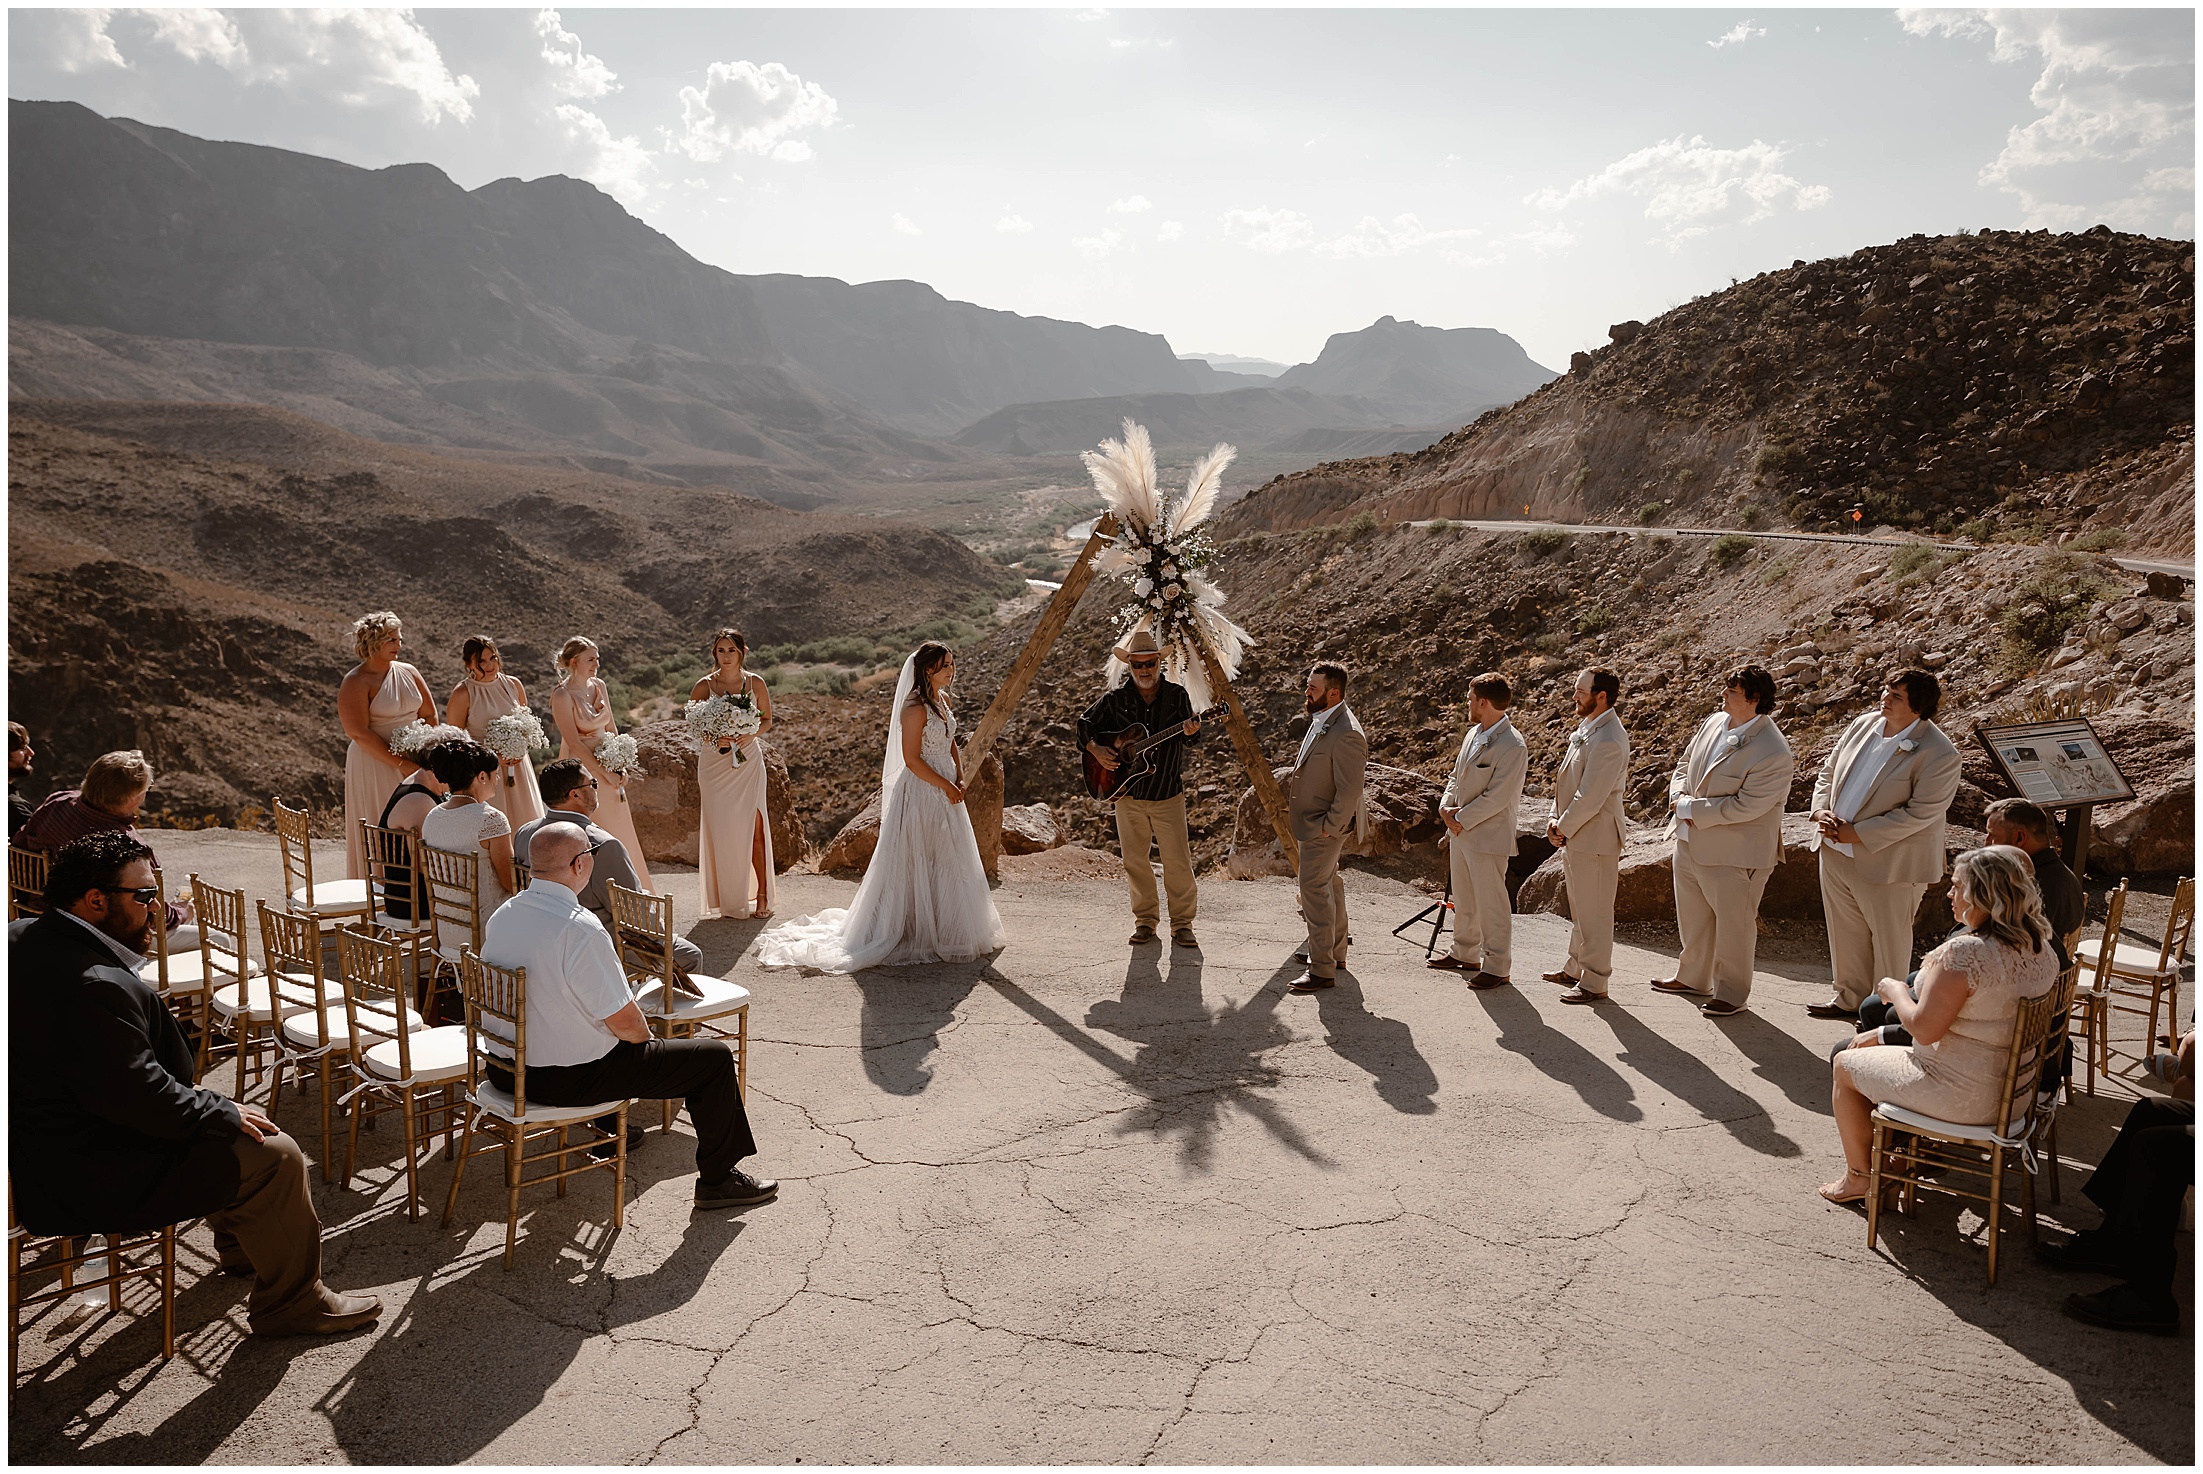 Big Bend National Park Elopement, Big Bend State Park Elopement, lost mine trail, Texas Adventure Elopements, National Park elopements, Texas small weddings, Where to elope in texas, Brit nicole photography, how to elope with family